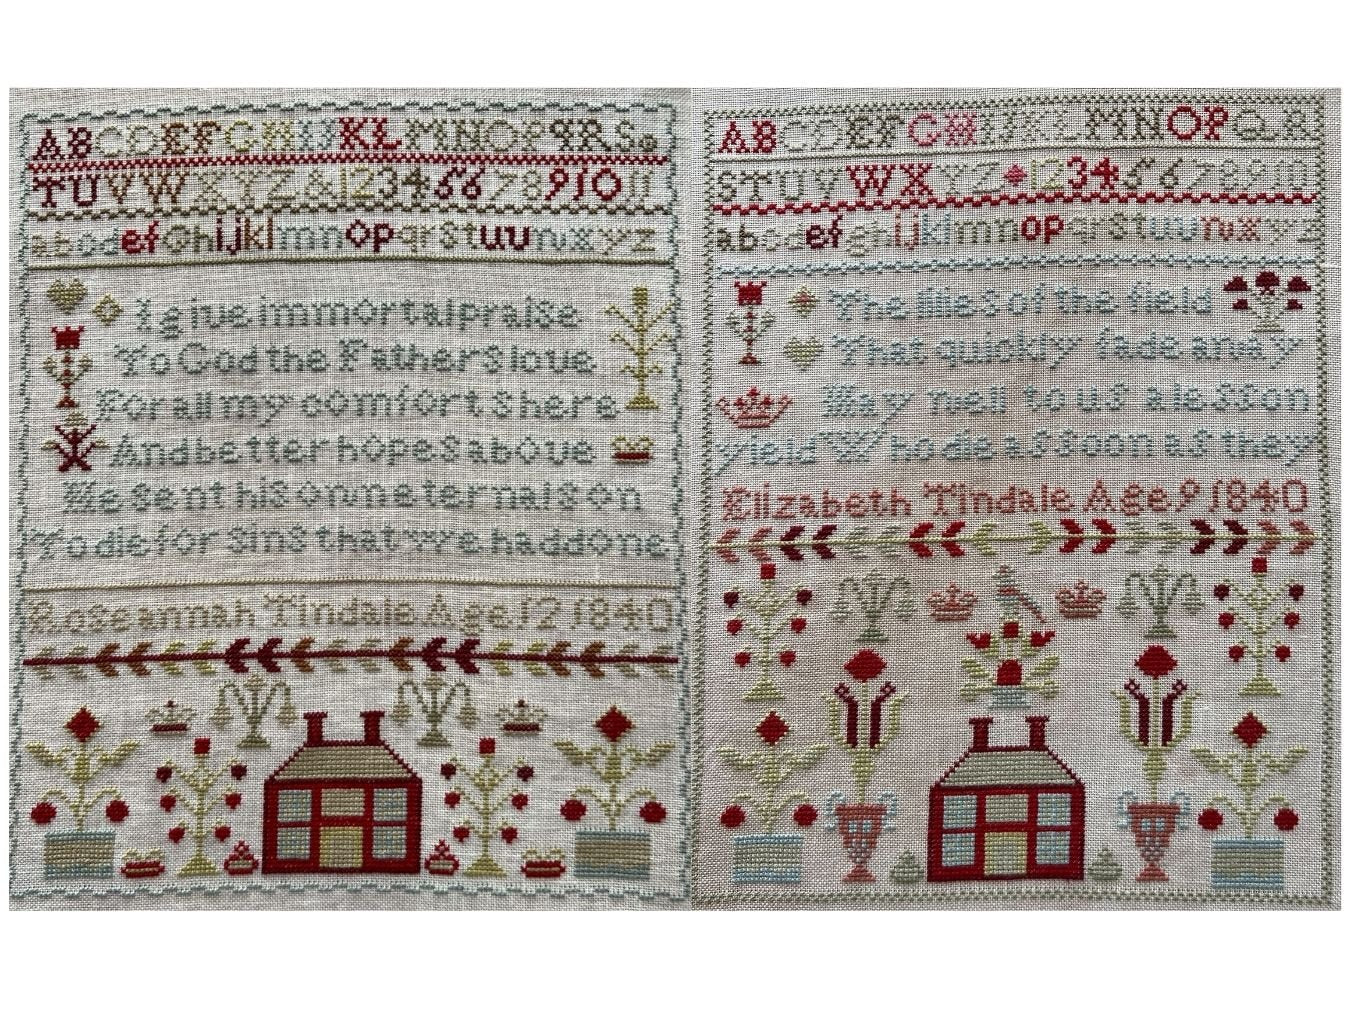 Tindale Sisters 1840 Two Samplers Together PDF